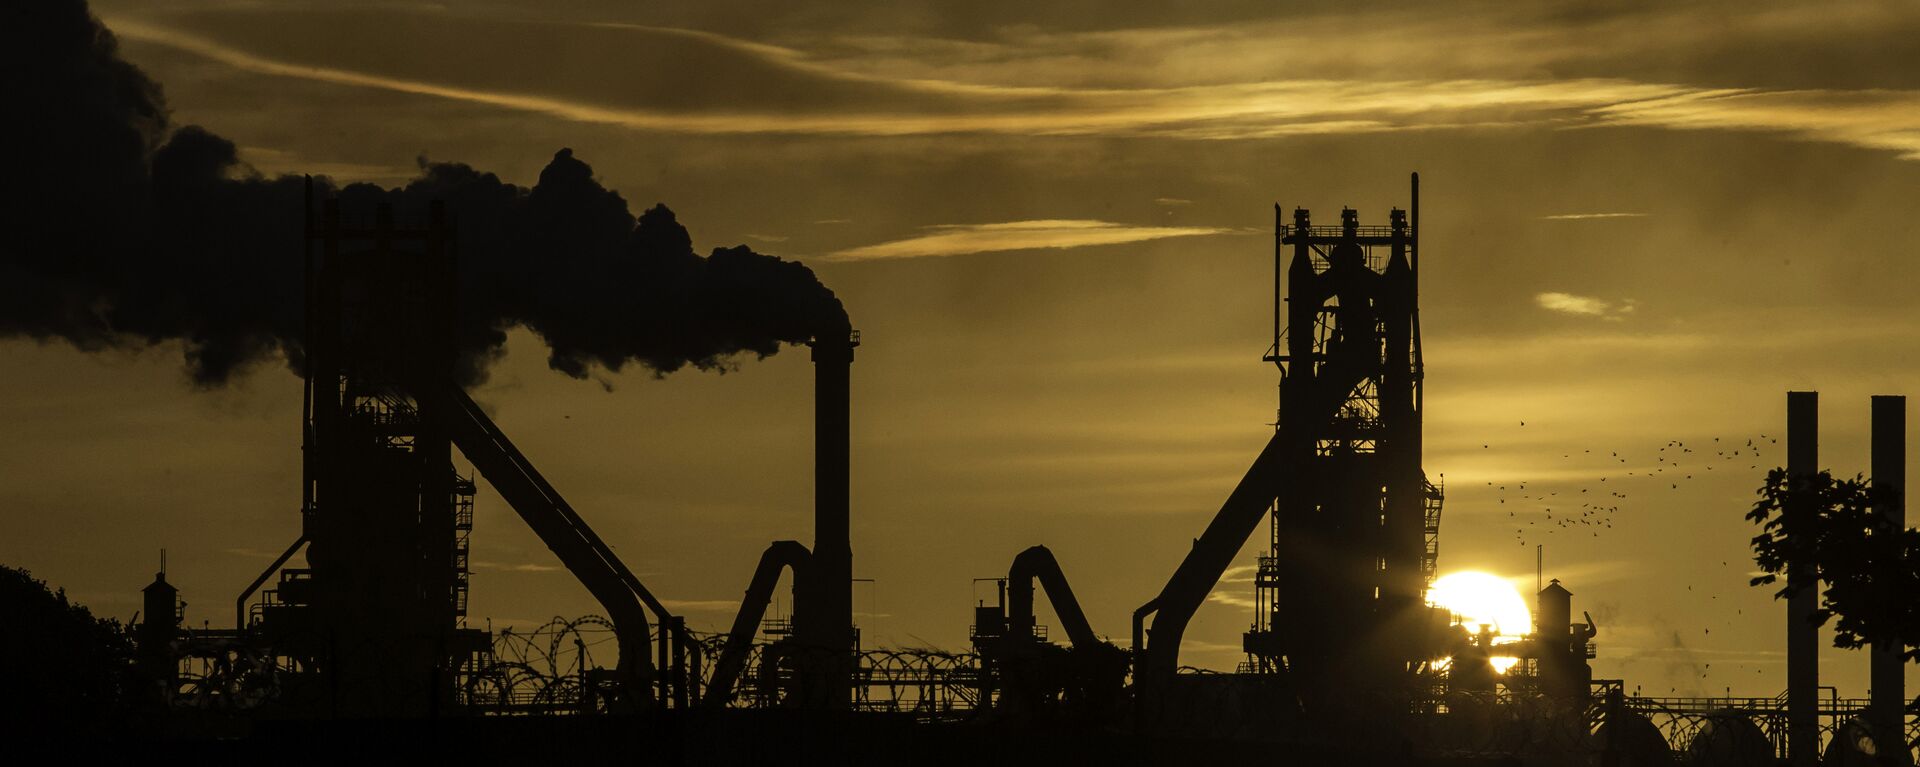 The sun rises behind the British Steel - Scunthorpe plant in north Lincolnshire, north east England on September 28, 2016 - Sputnik International, 1920, 11.11.2019